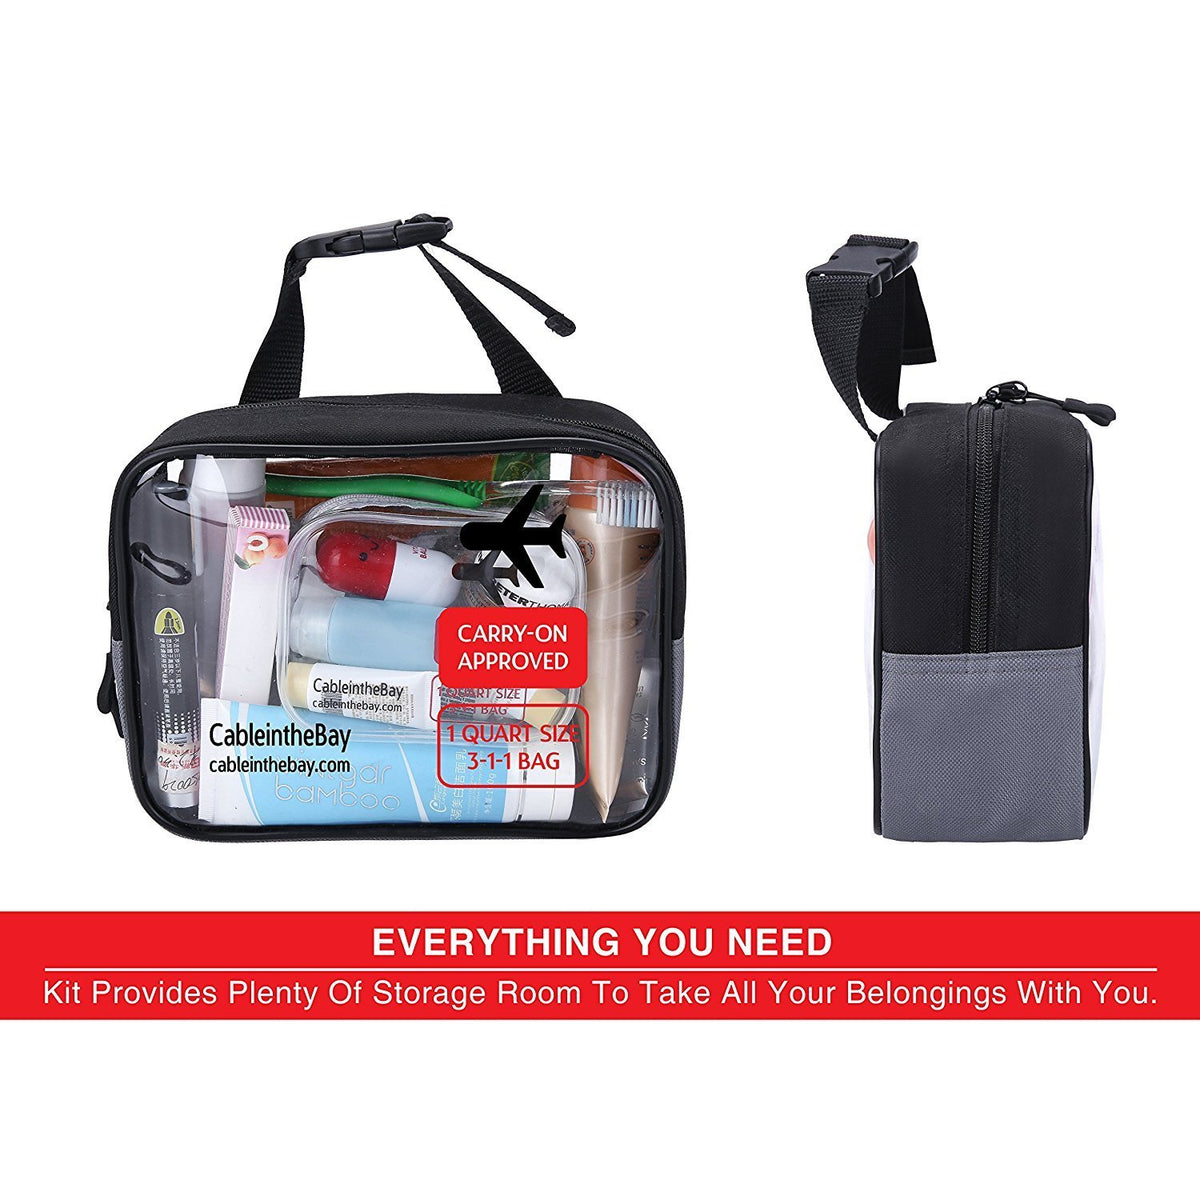 TSA Approved Clear Travel HangingToiletry Bag+ Carrying Handle|Quart Size with Zipper|Airport Airline Compliant Bag|Carry-On for Liquids/ Bottles|Men's/Women's 3-1-1 Kit+Travel